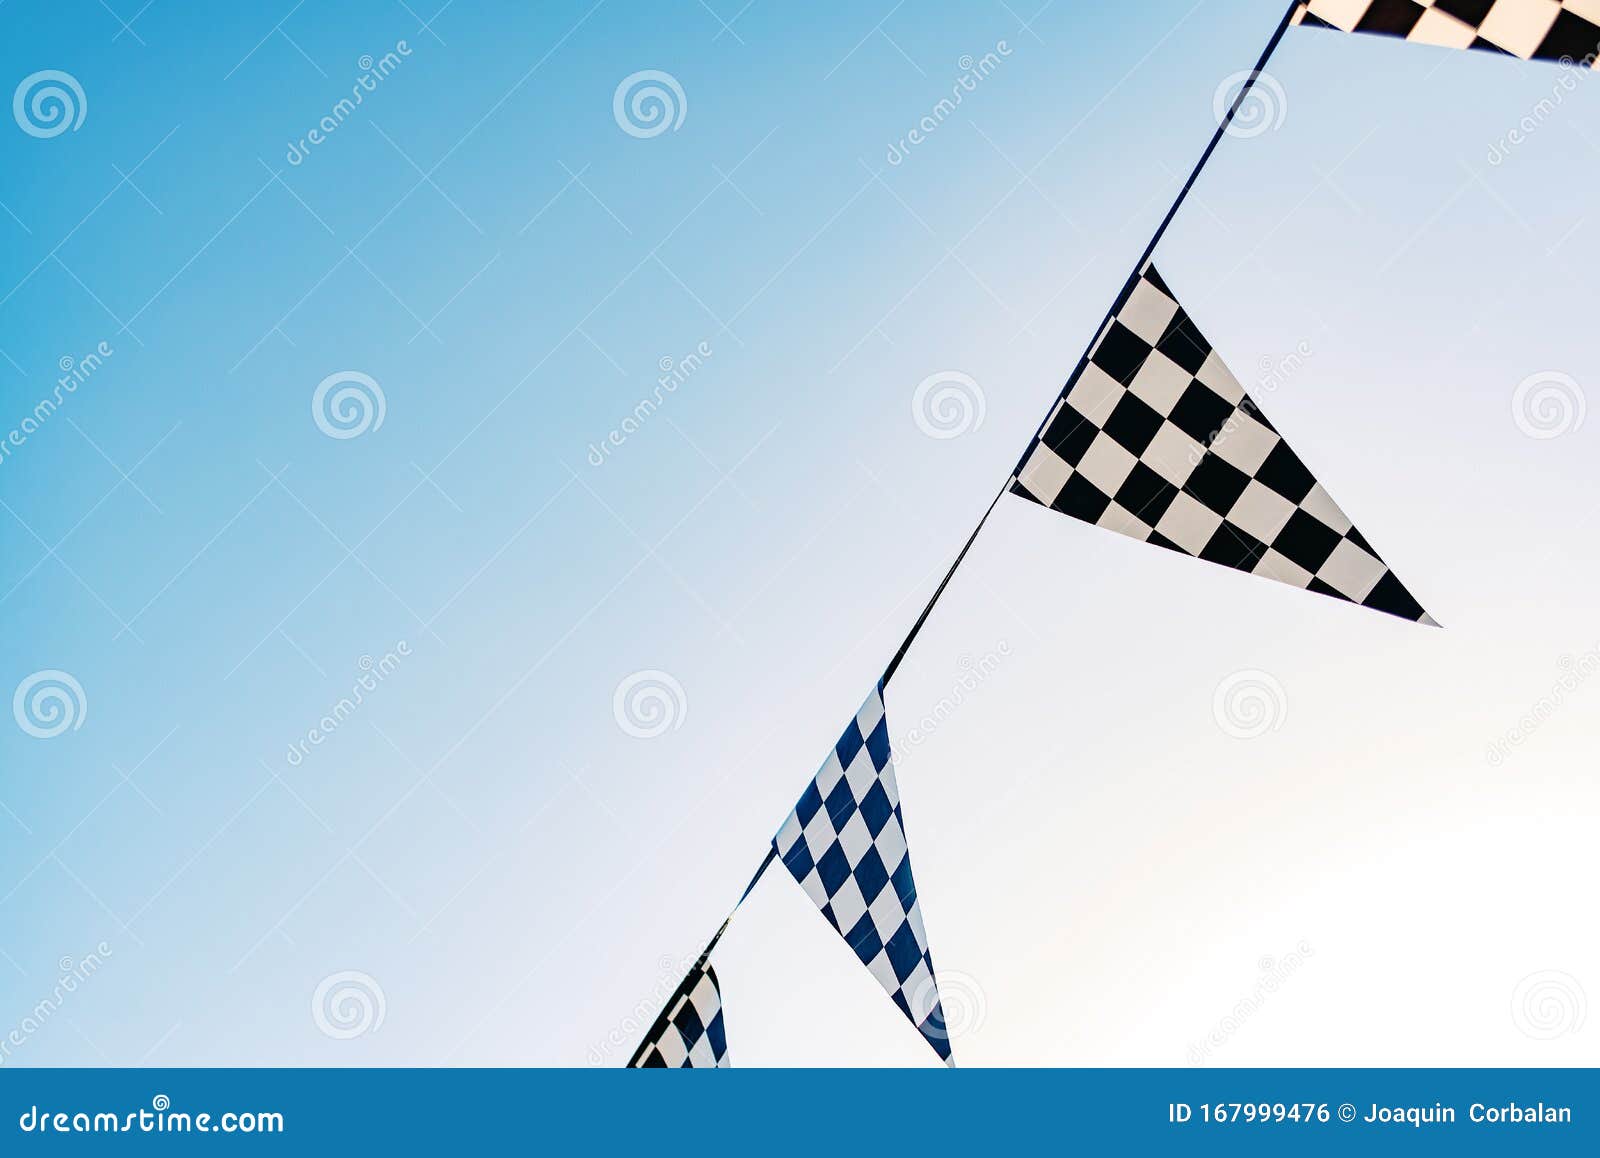 Hanging Decoration Pennants With The Design Of A Checkered ...